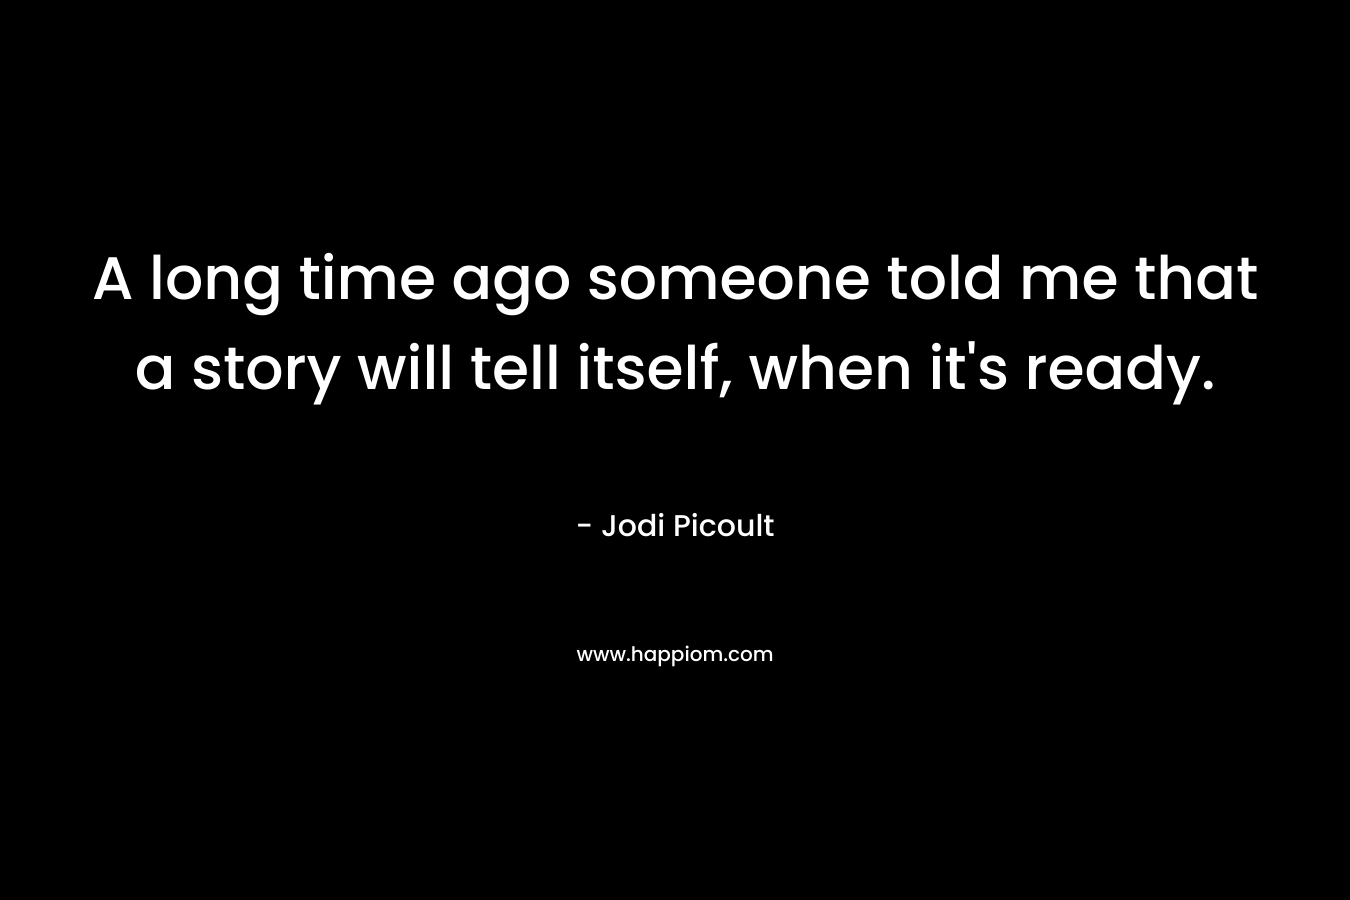 A long time ago someone told me that a story will tell itself, when it’s ready. – Jodi Picoult